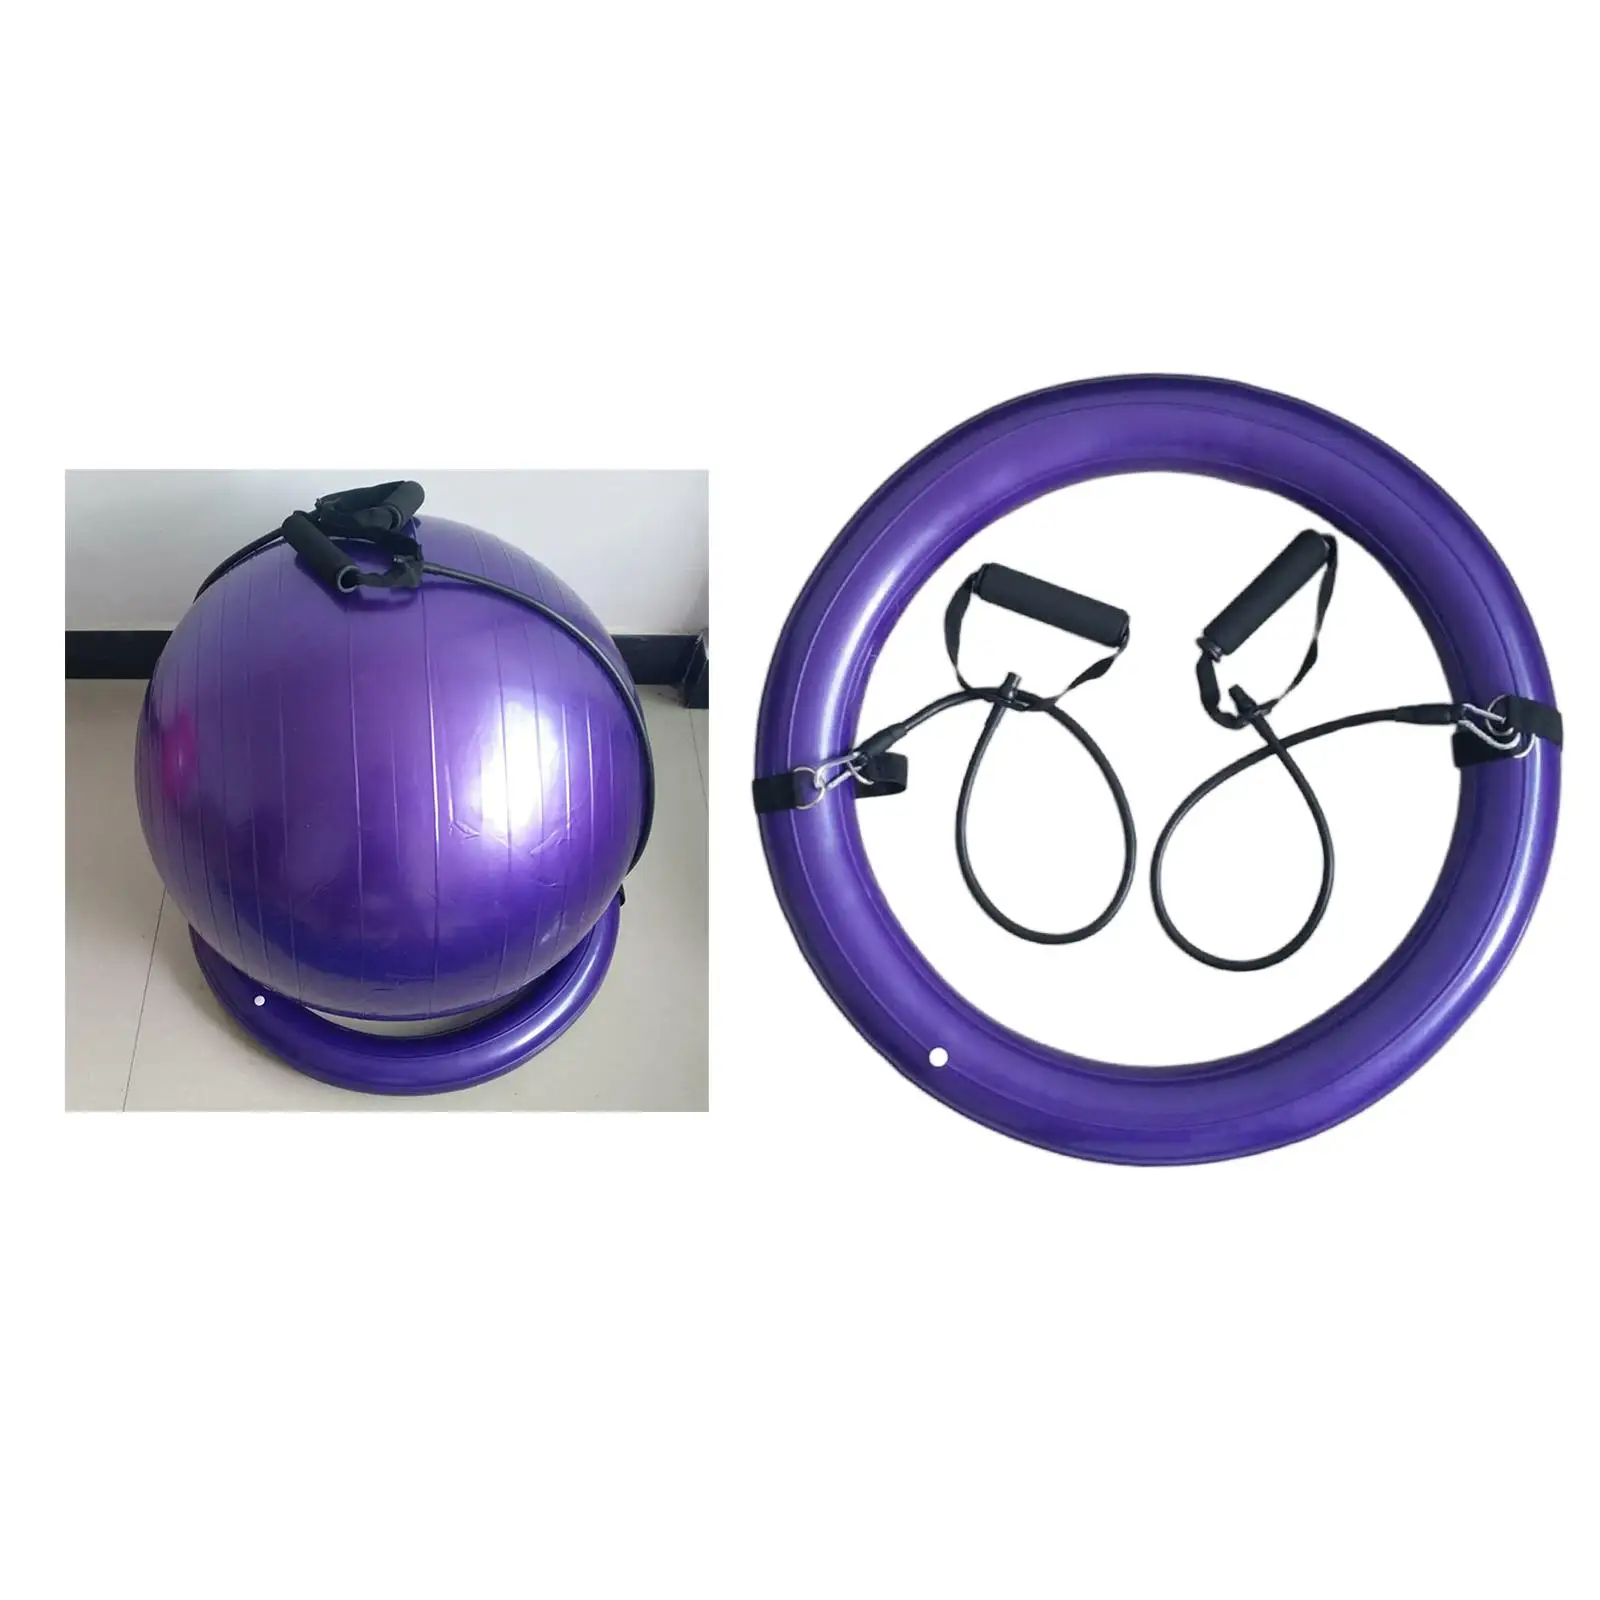 Stability Ball Stand Holding Base with Resistances Band Office